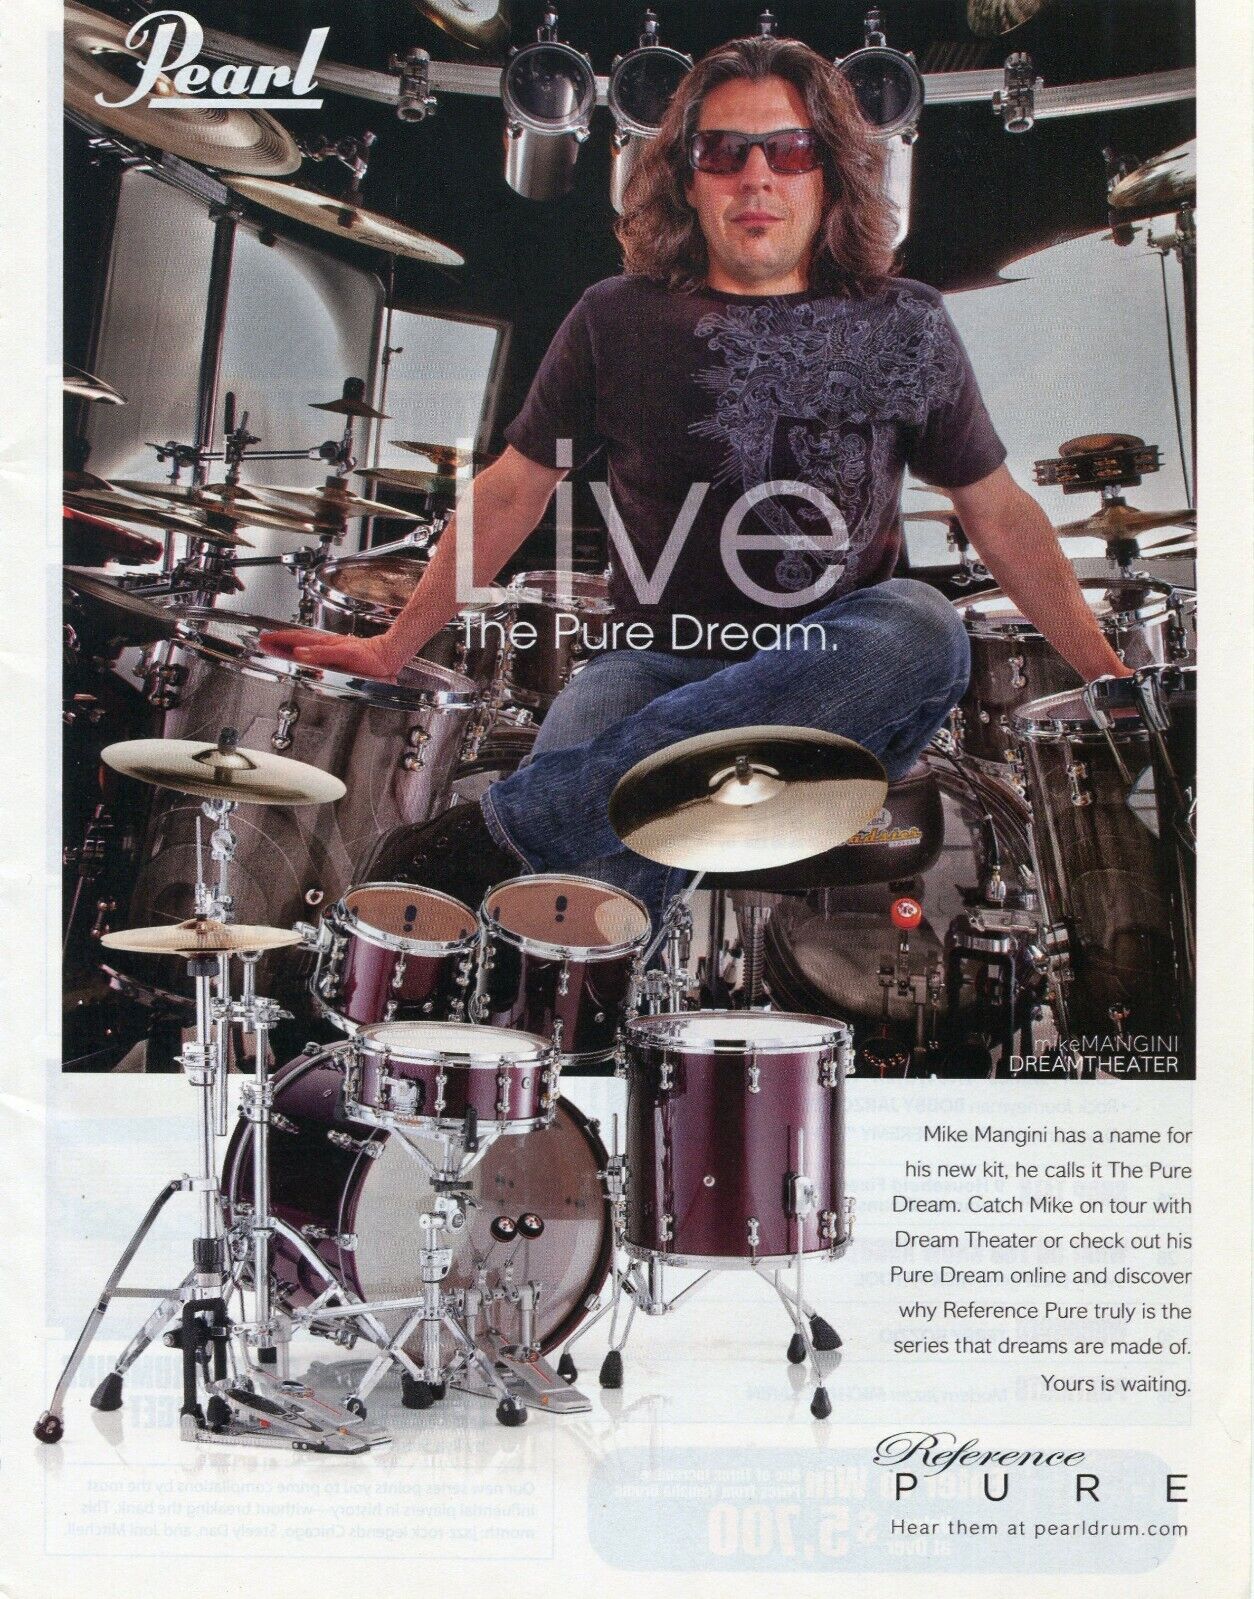 2012 Print Ad of Pearl Reference Pure Drum Kit w Mike Mangini of Dream Theater